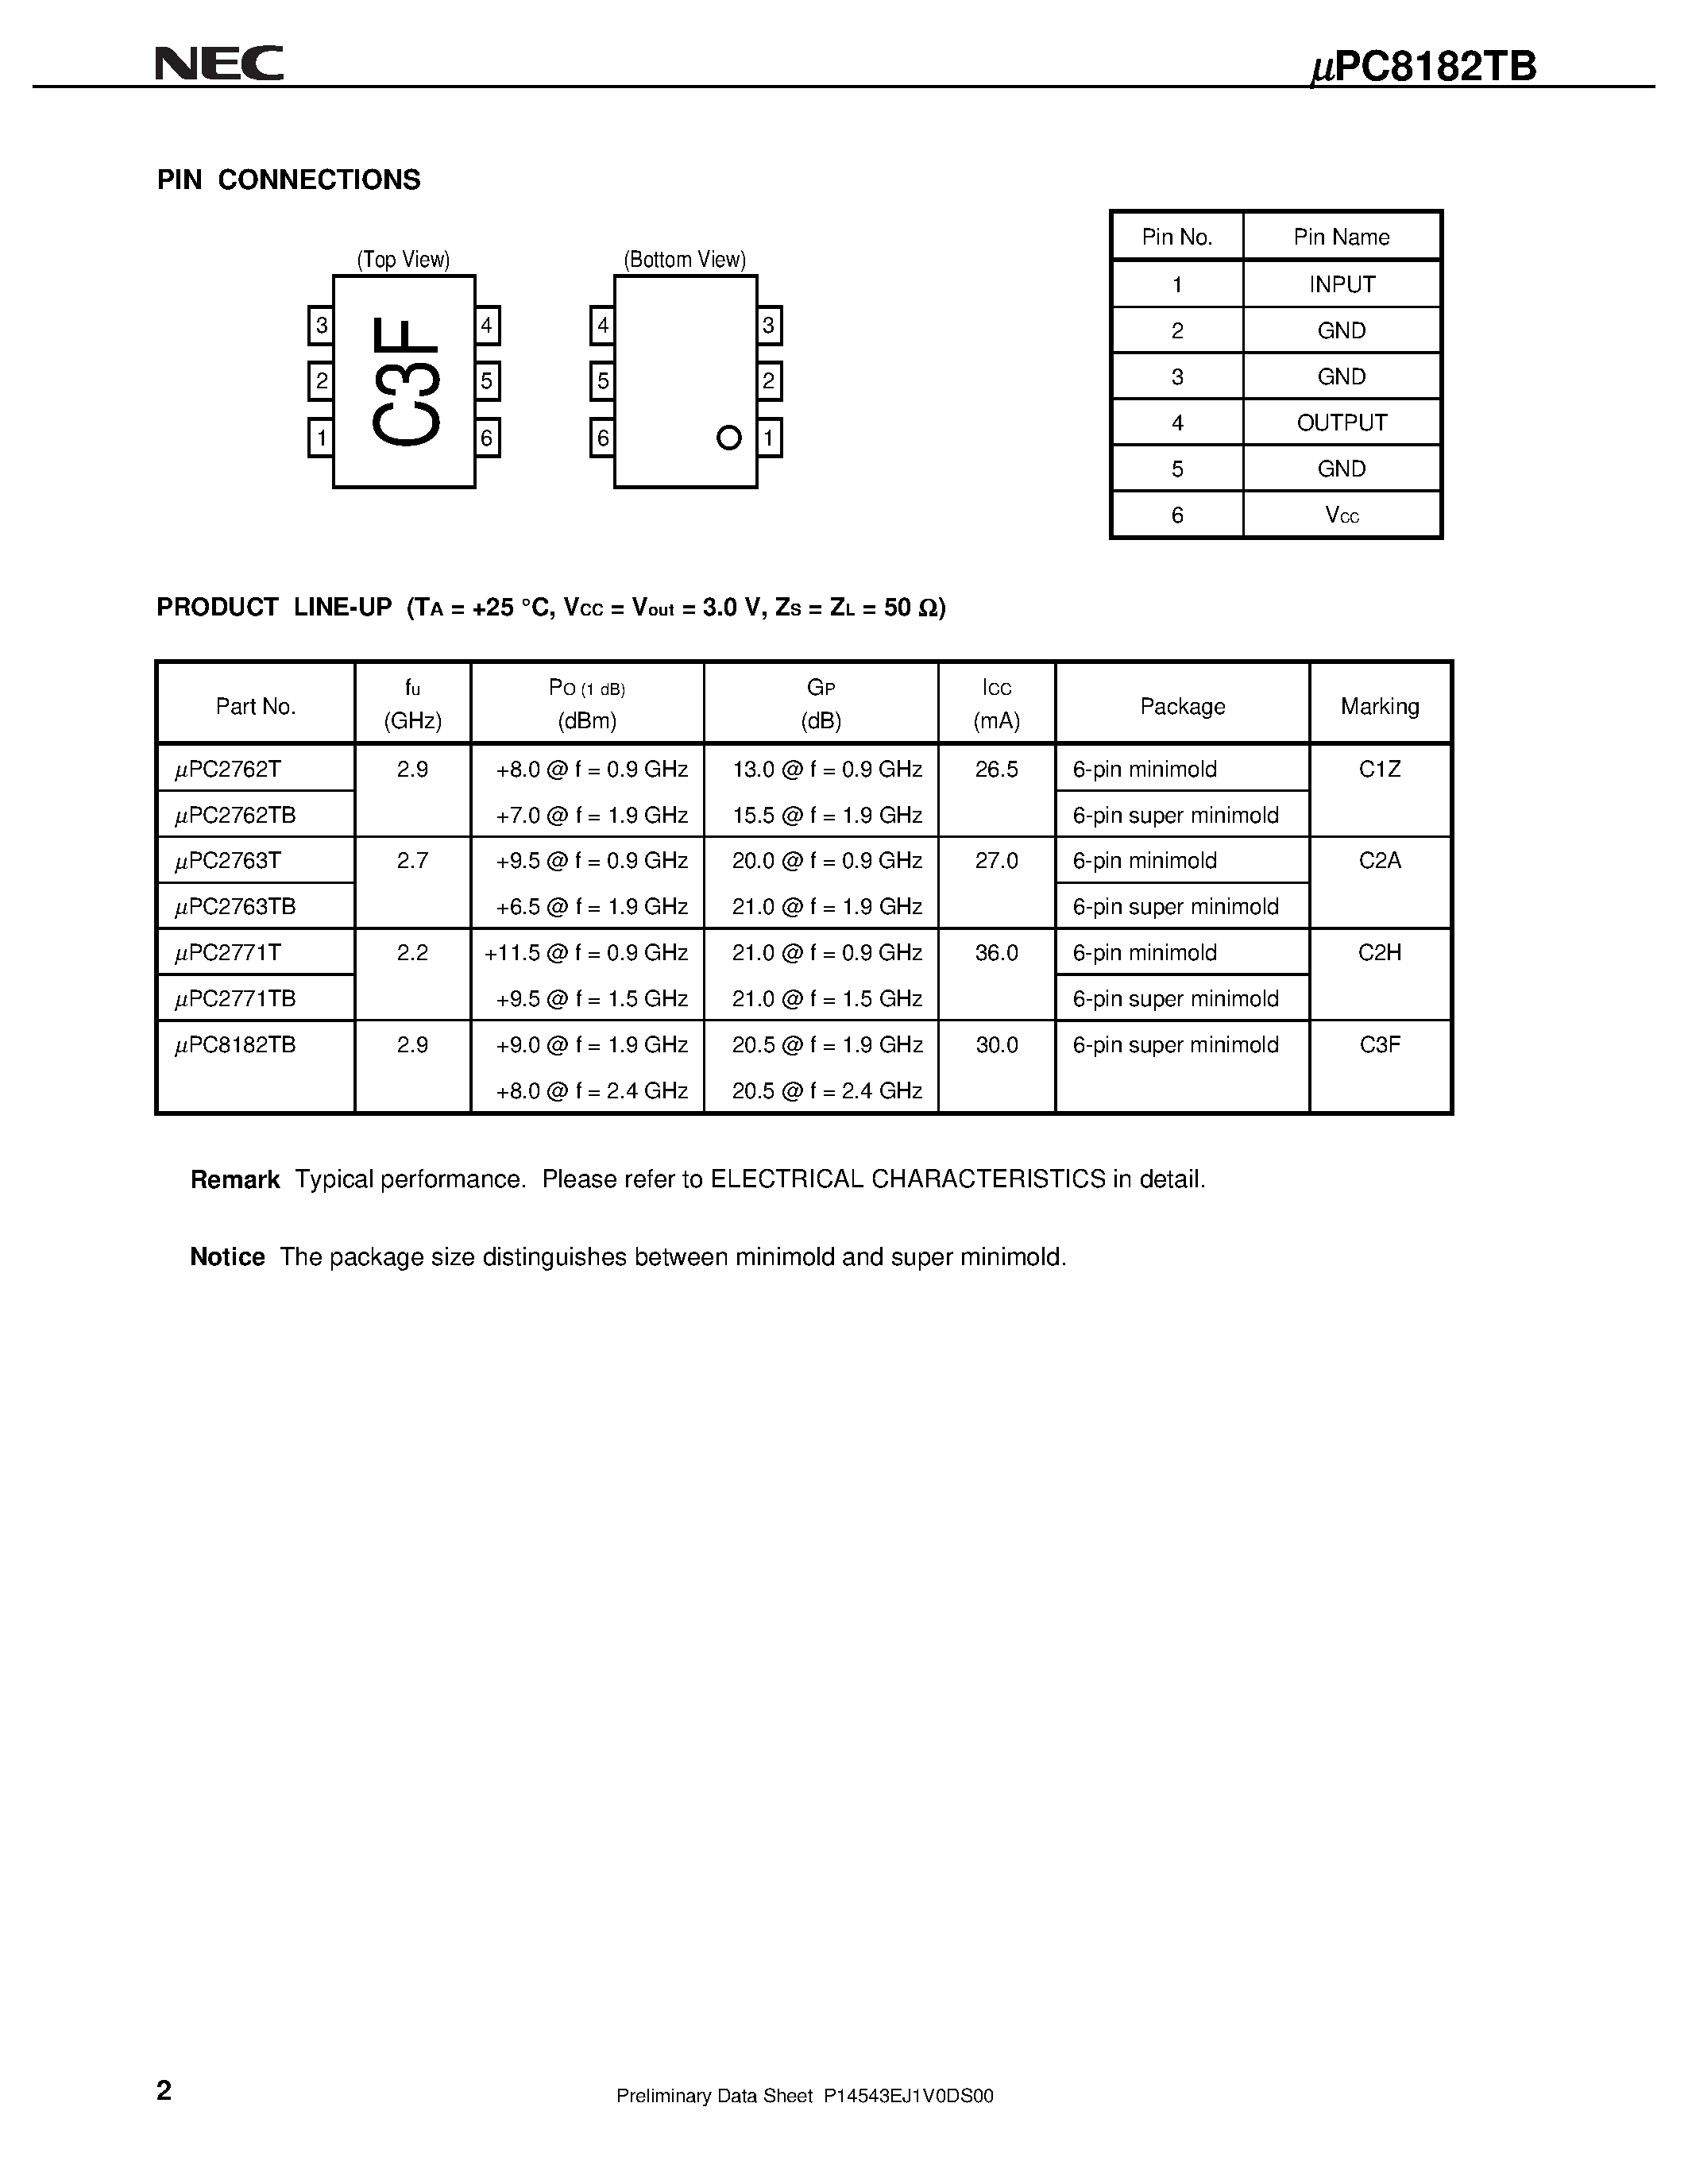 Datasheet UPC8182TB-E3 - 3 V/ 2.9 GHz SILICON MMIC MEDIUM OUTPUT POWER AMPLIFIER FOR MOBILE COMMUNICATIONS page 2